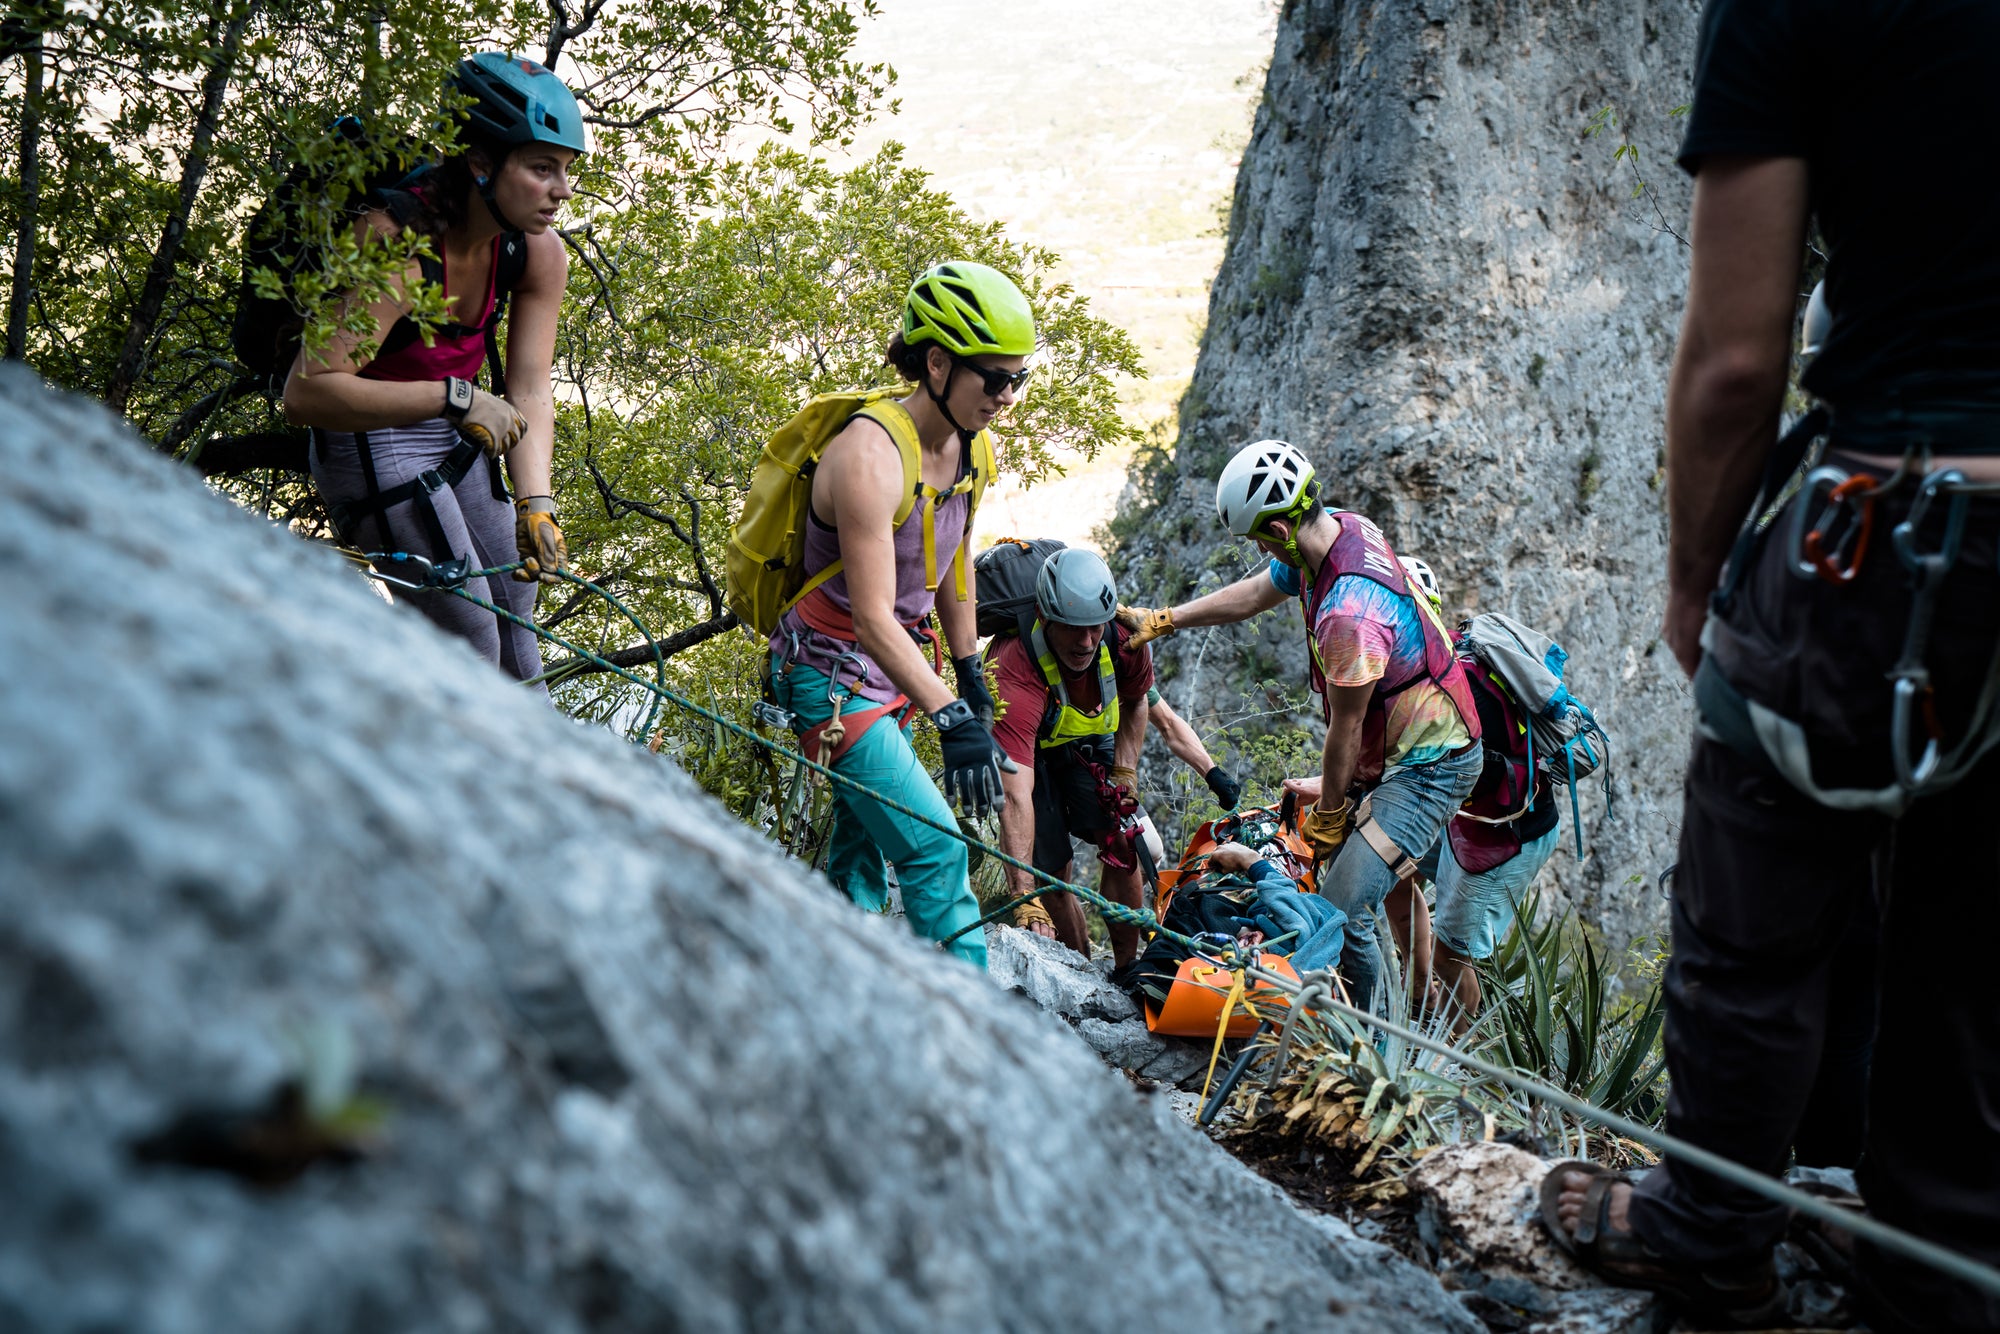 “The Worst Case Scenario, But Worse”—Volunteers Save Climber After 130-foot Fall